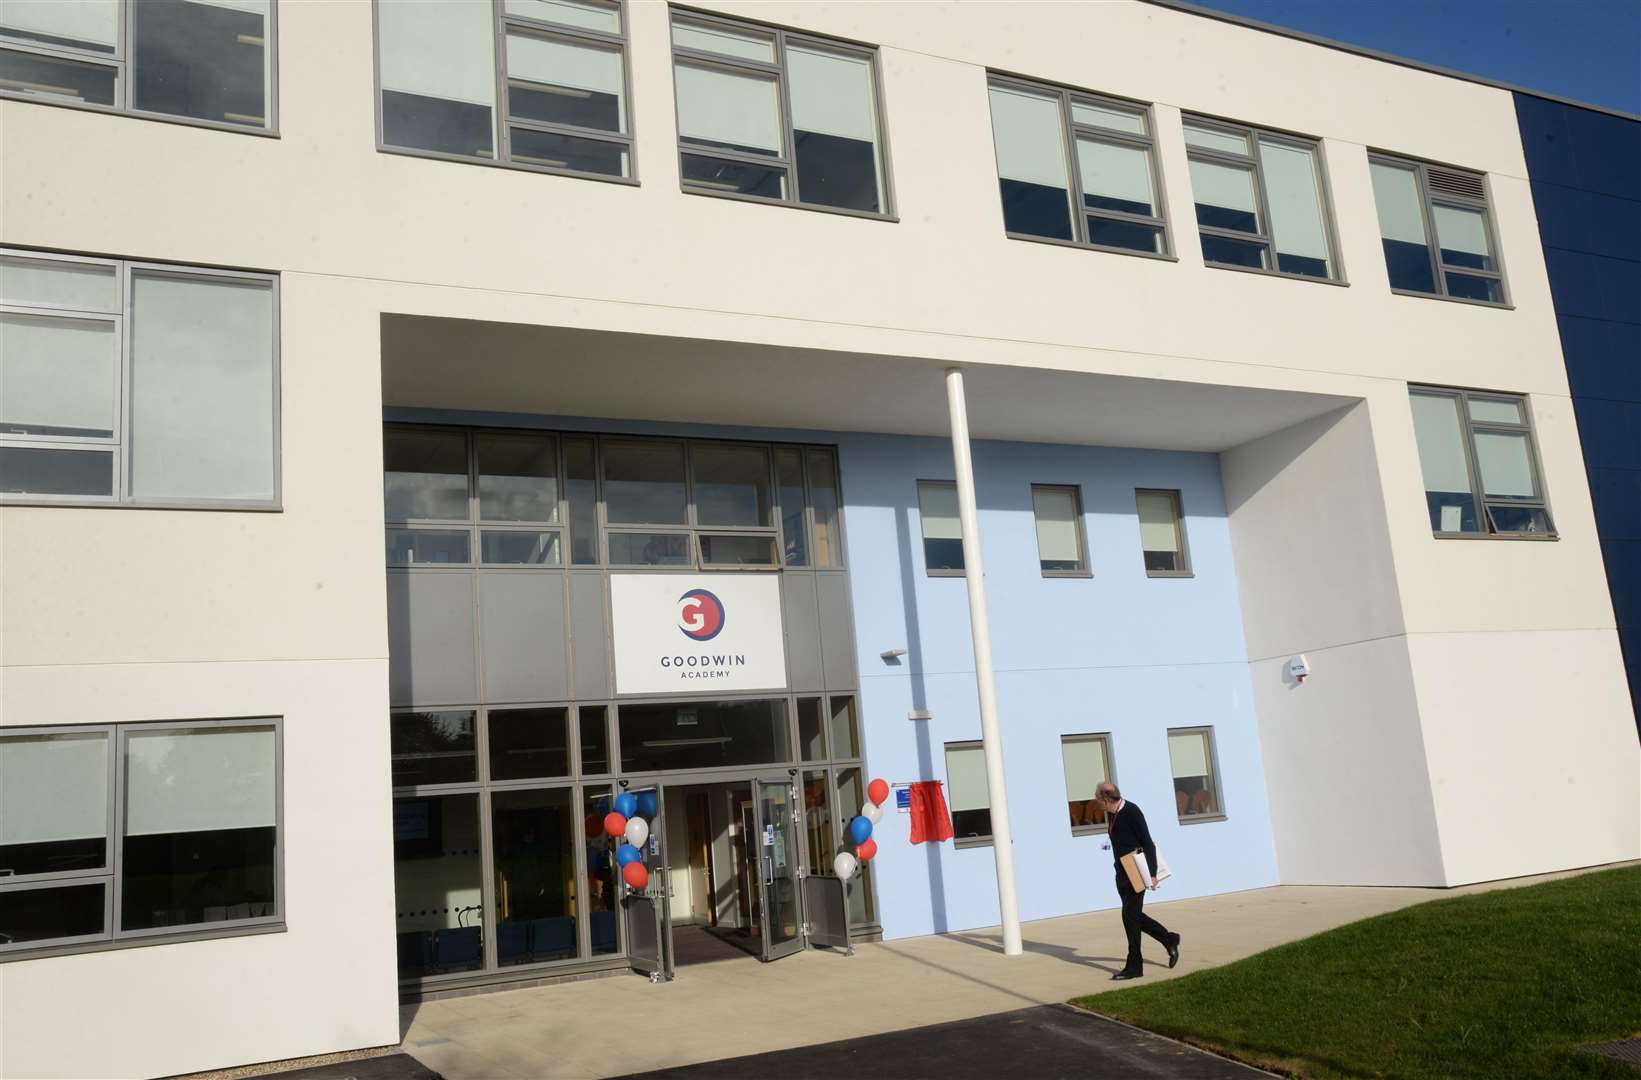 The Goodwin Academy in Hamilton Road, Deal is now operated by the Thinking Schools Academy Trust. Picture: Chris Davey